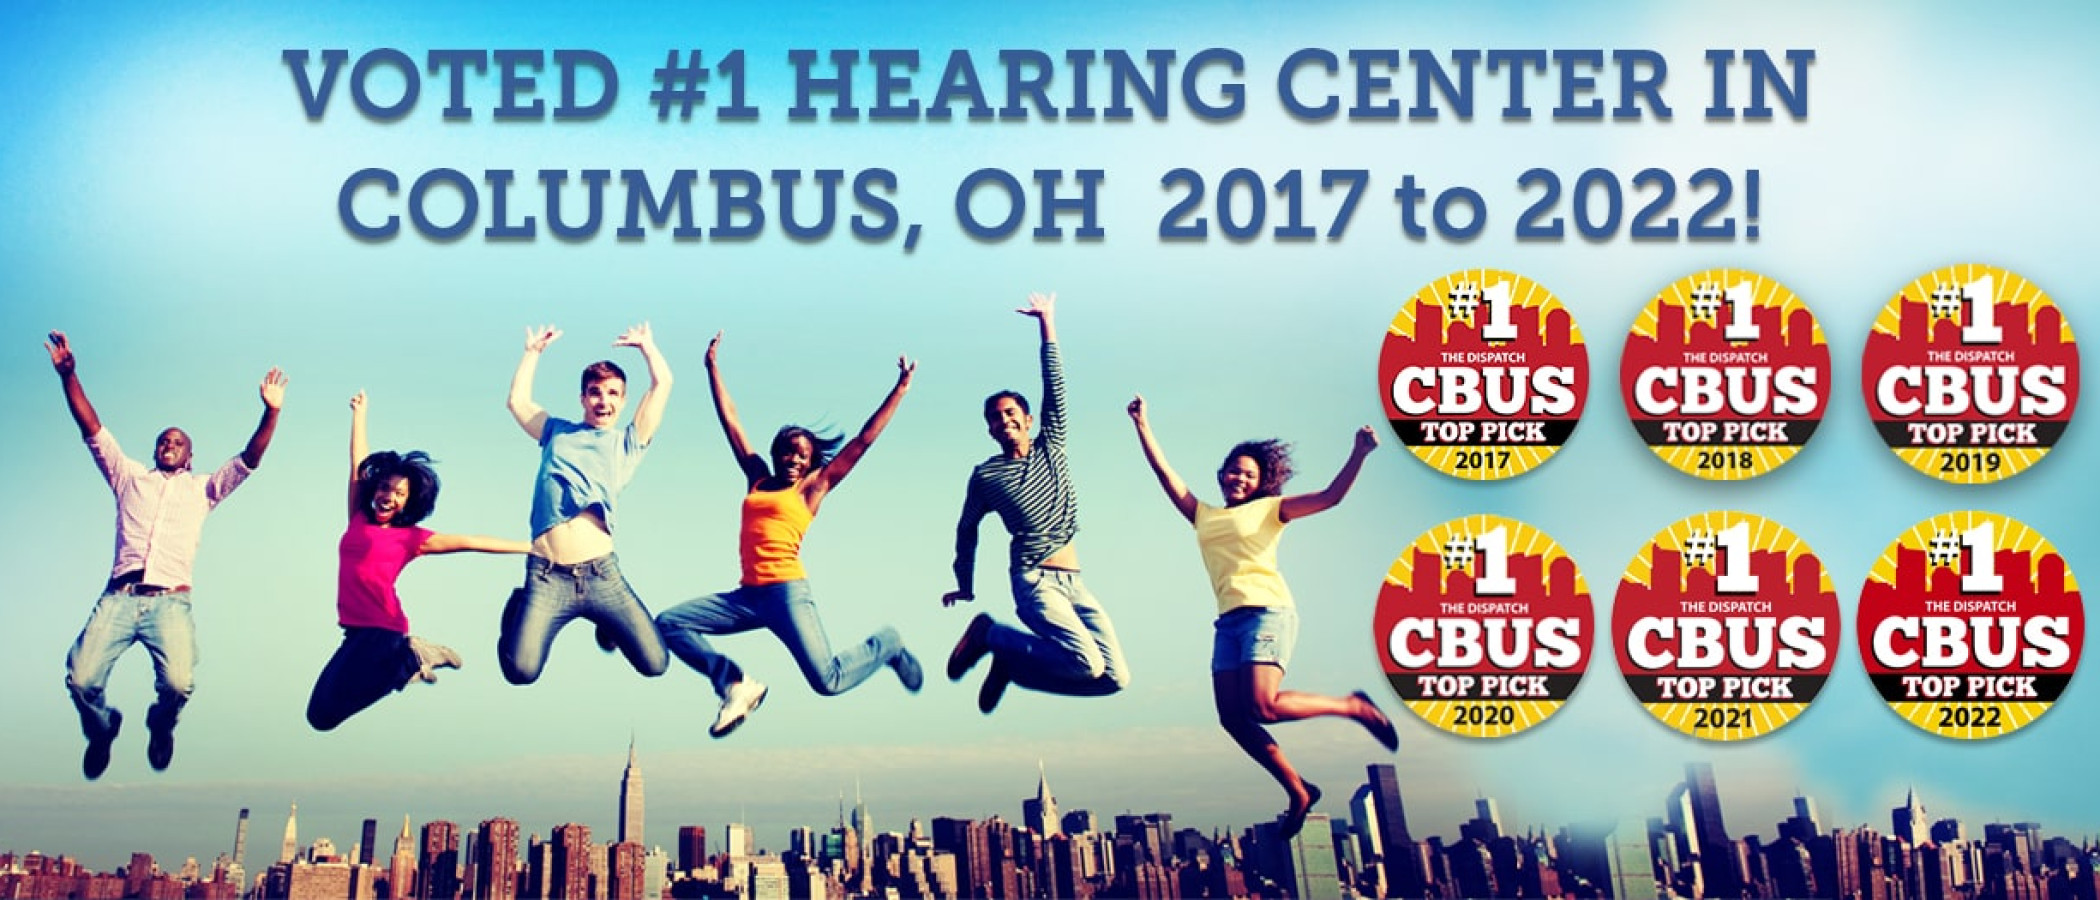 Voted #1 hearing center in Columbus from 2017-2022